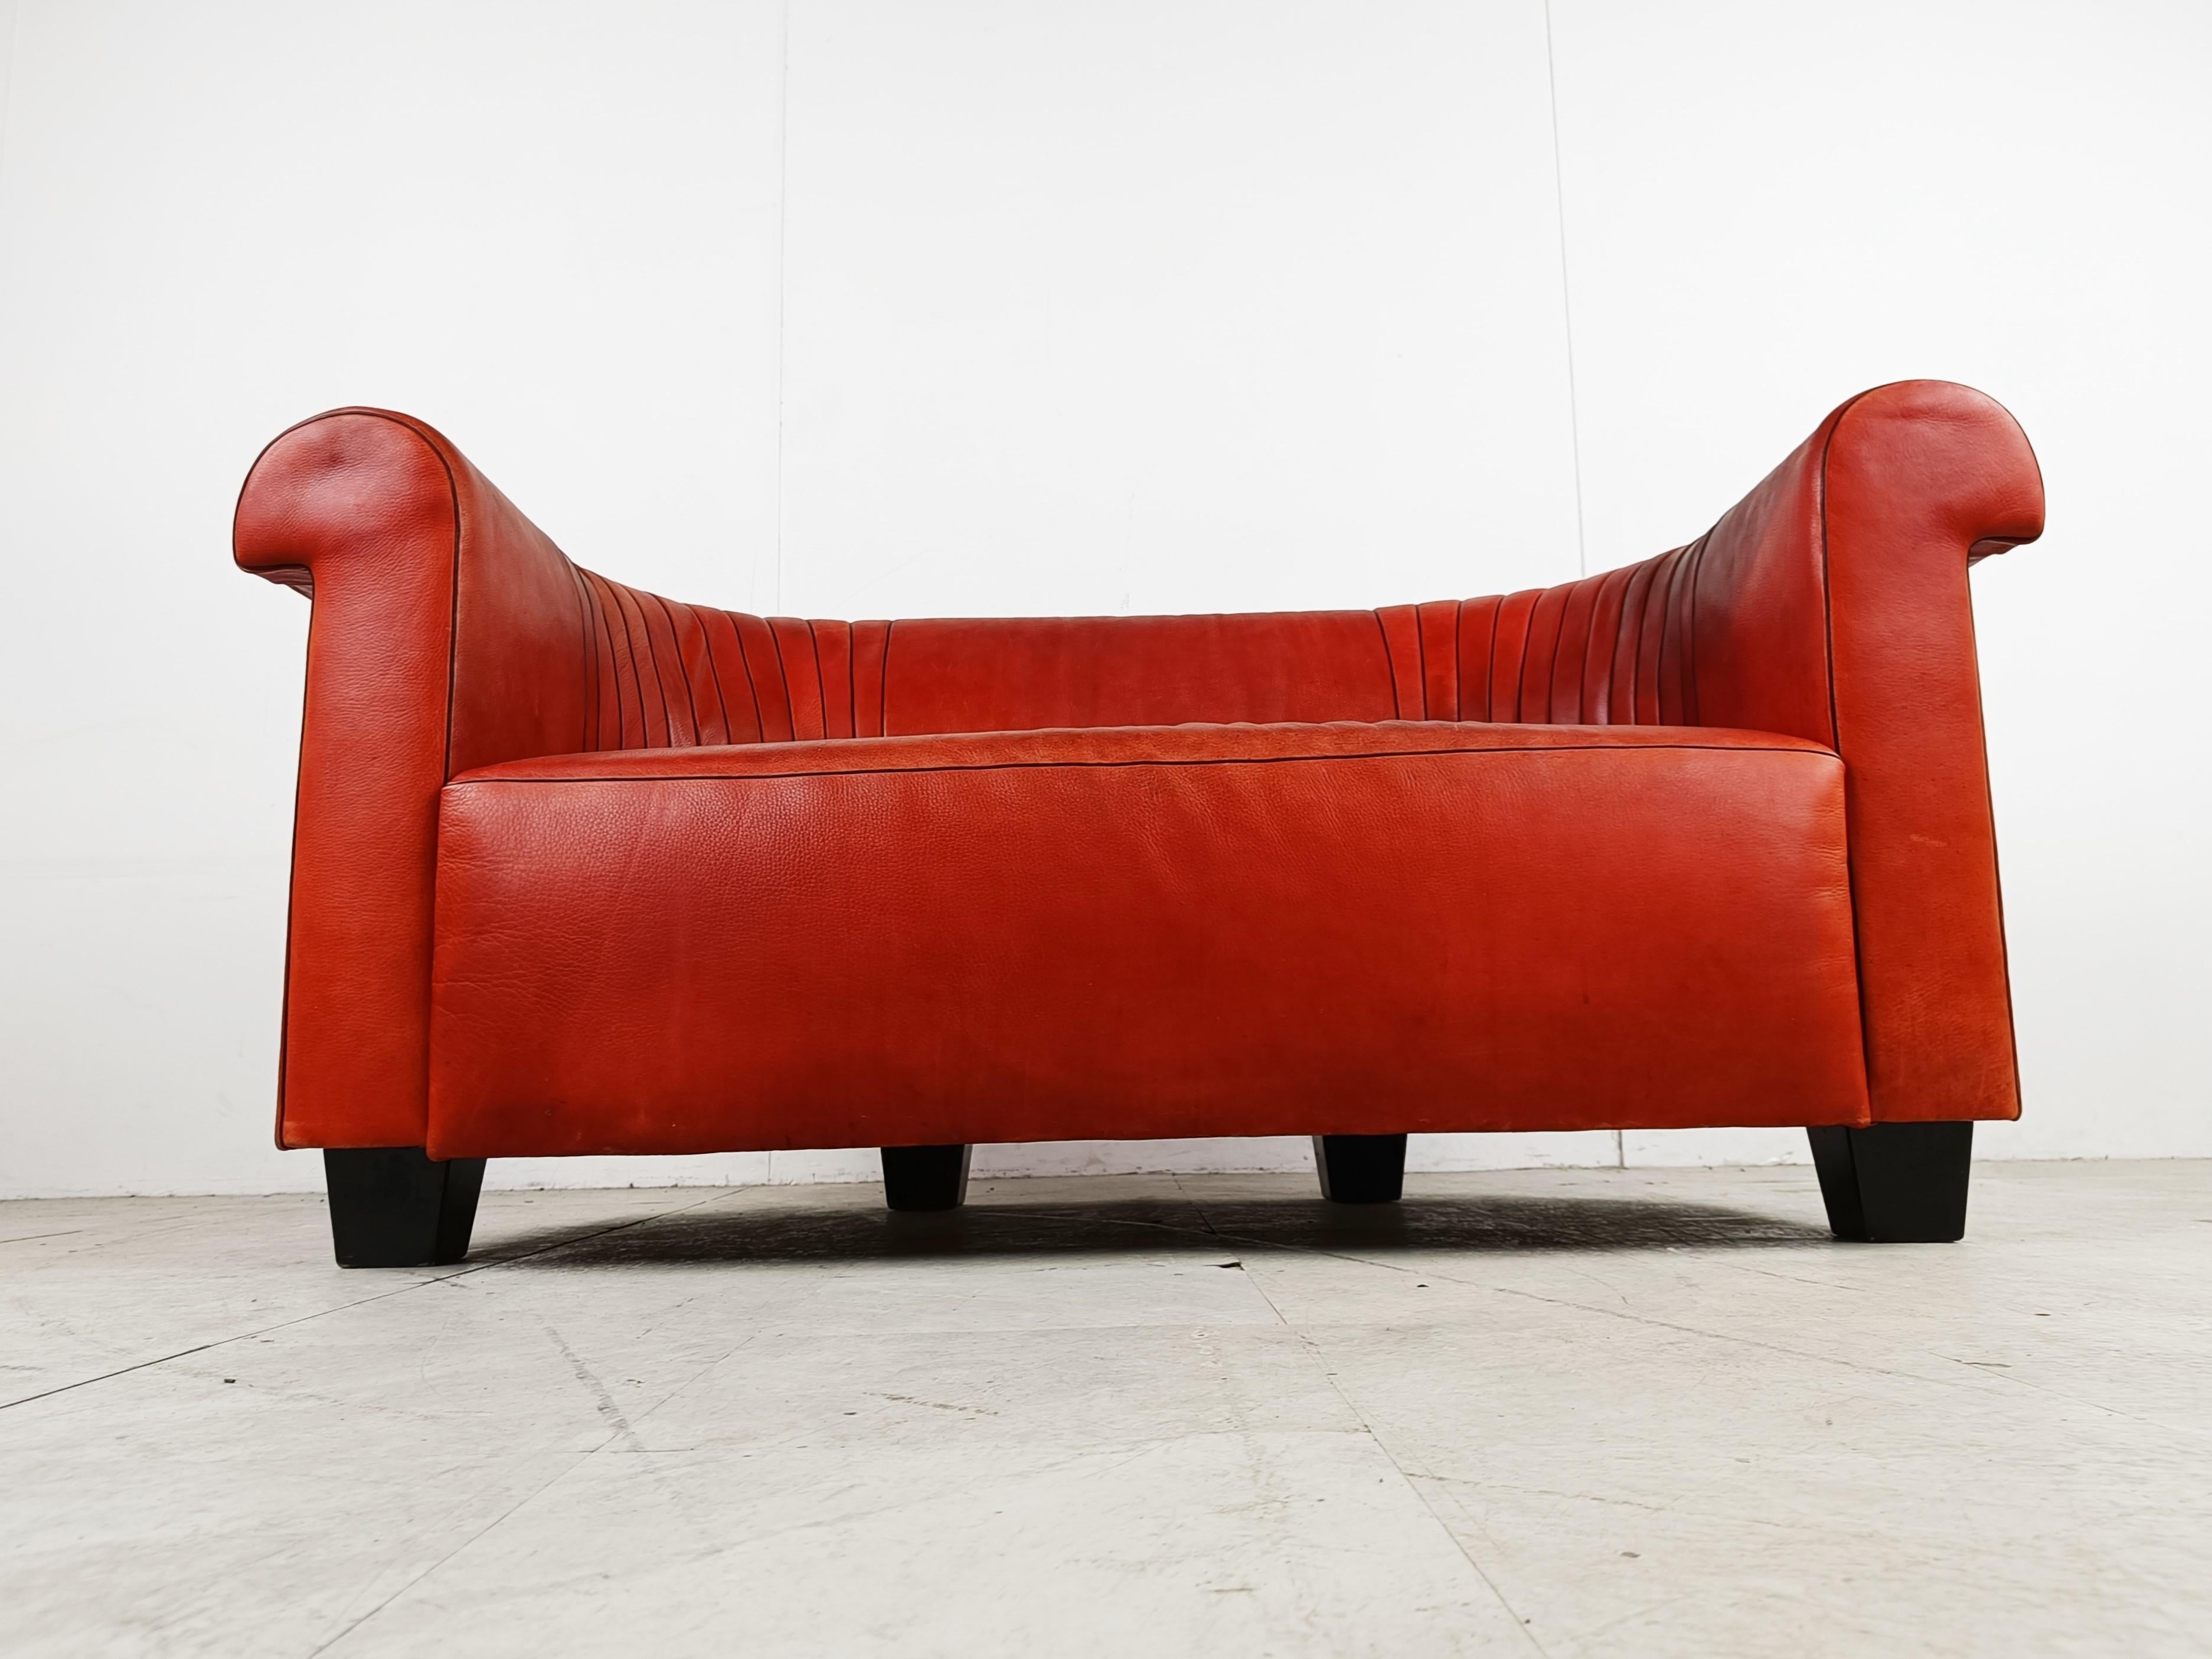 Rare DS700 sofa by deSede.

Beautiful red leather upholstery.

As always deSede uses top quality leather. 

The sofa has a nice curved shape, is very comfortable and has a chesterfield vibe.

Black wooden legs. 

Very good condition

1990s -